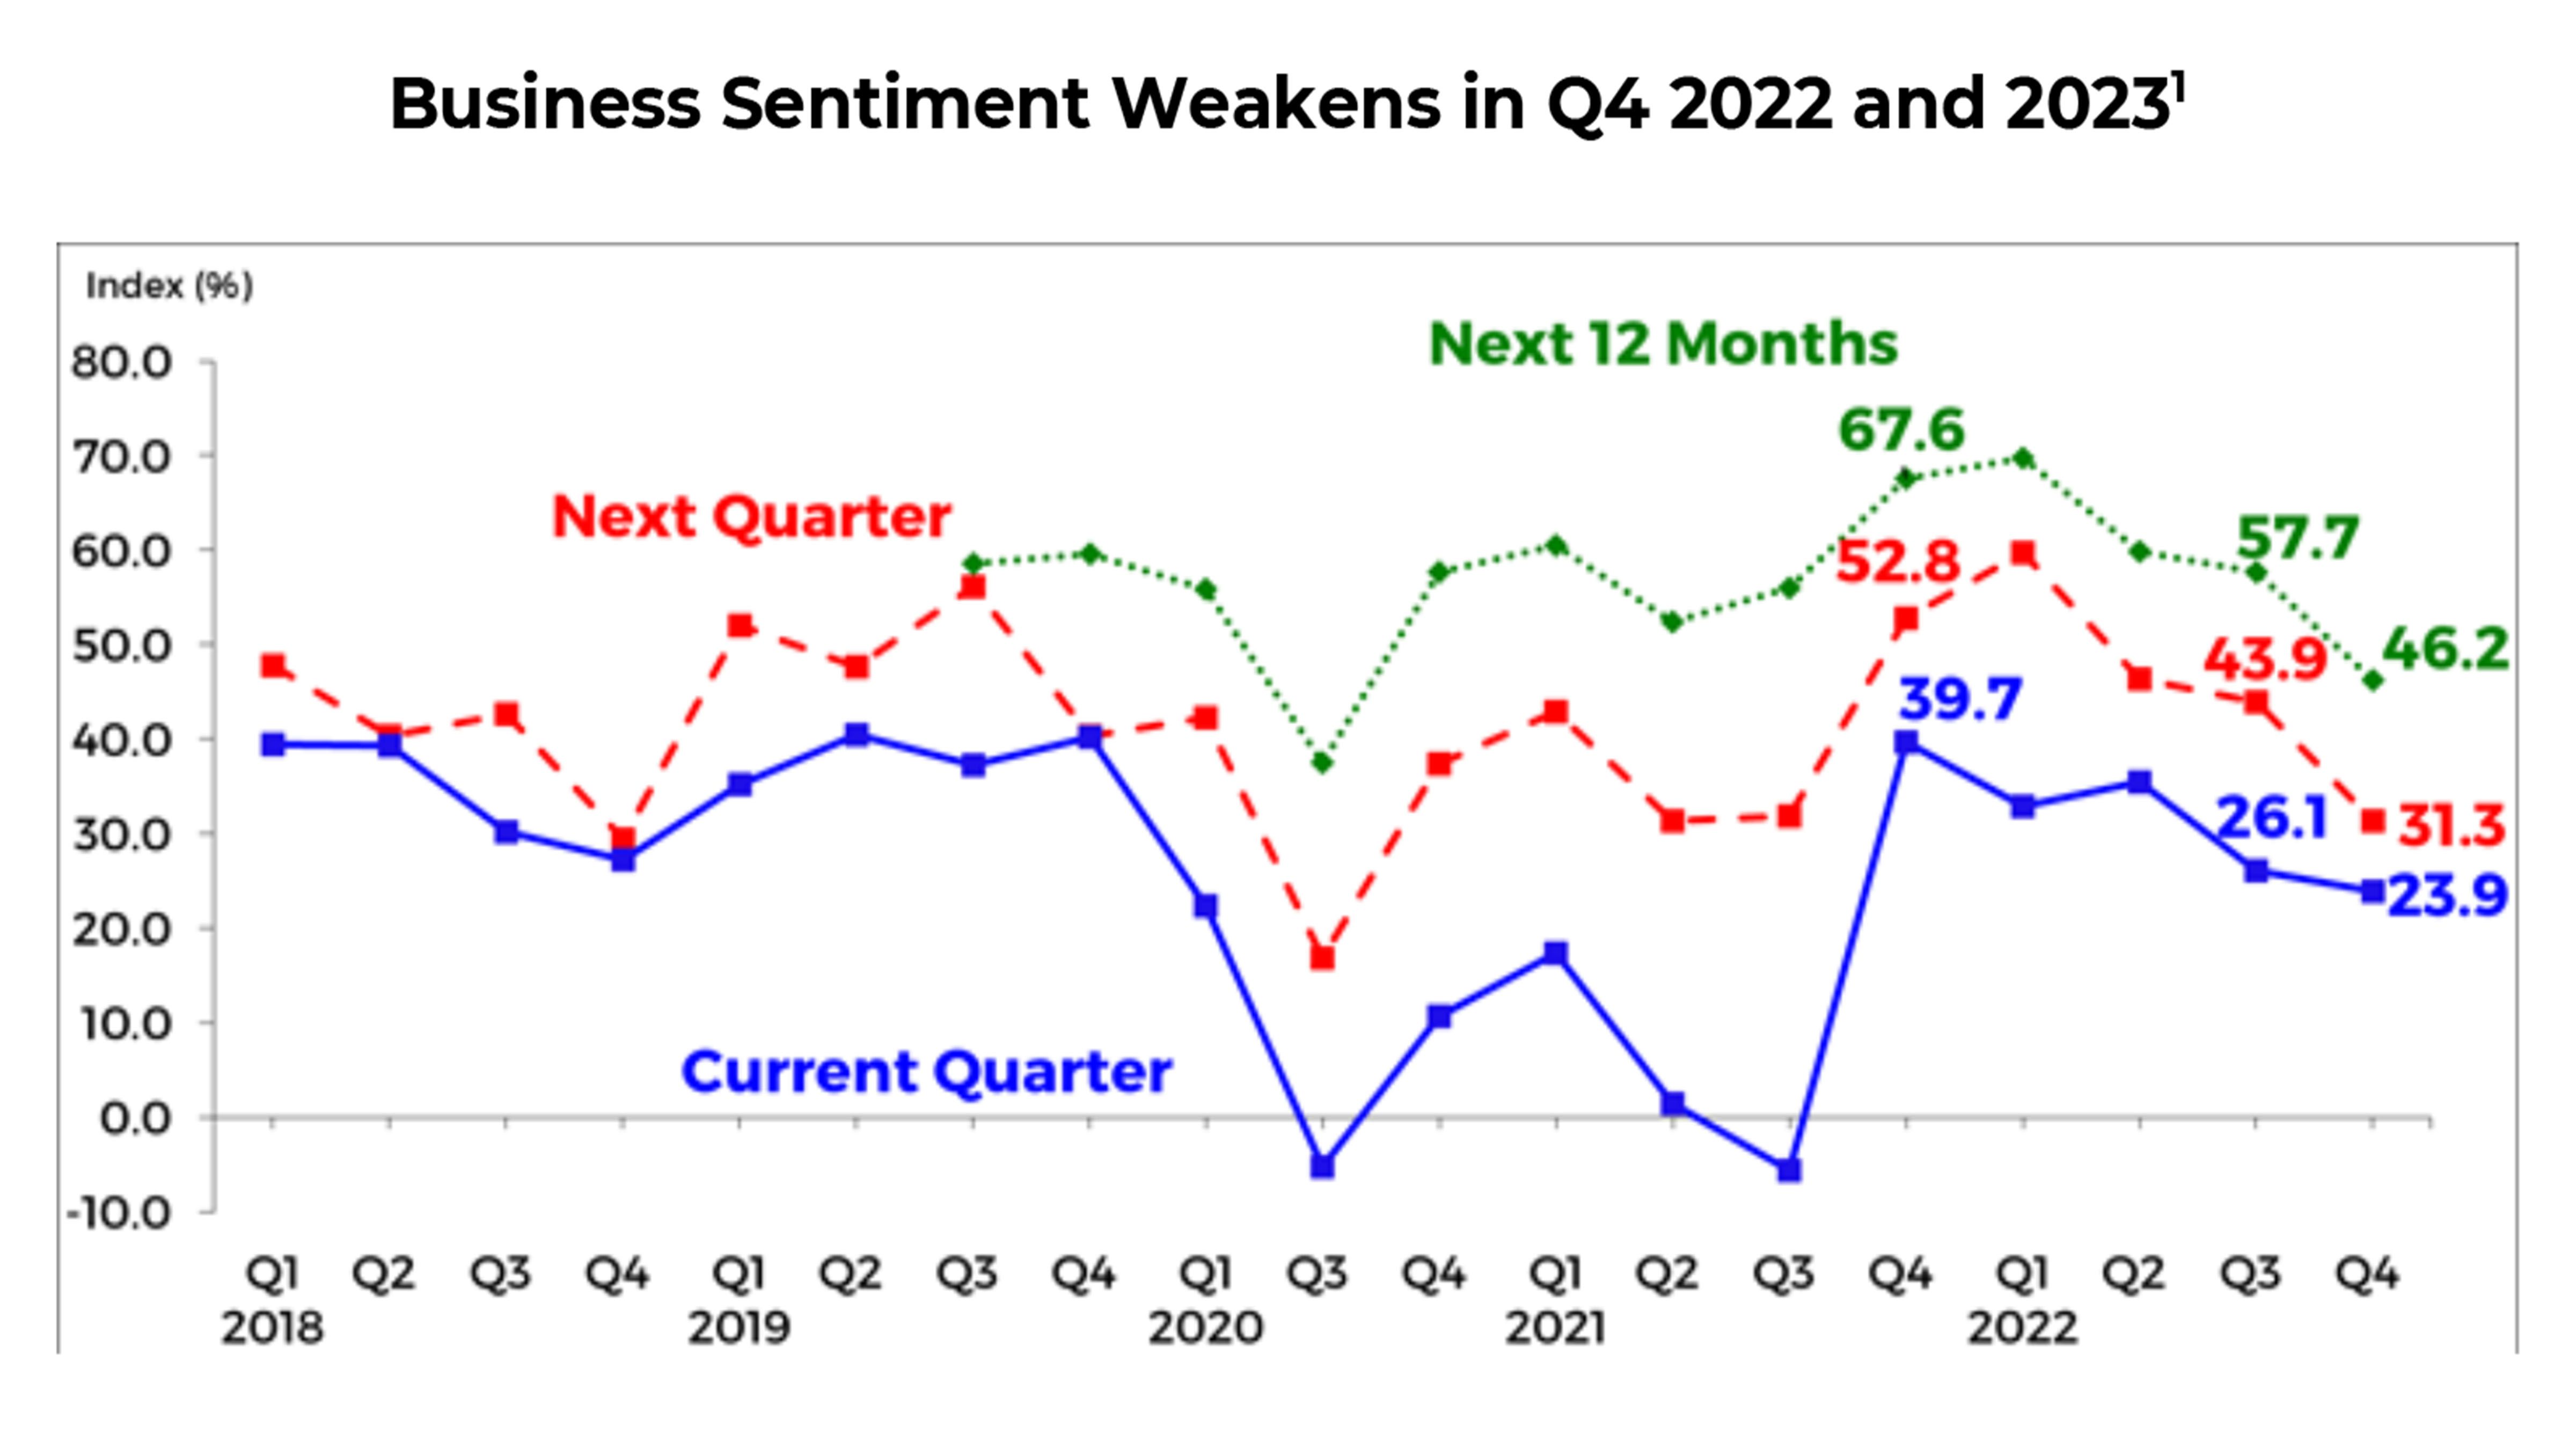 Business confidence declines in Q4